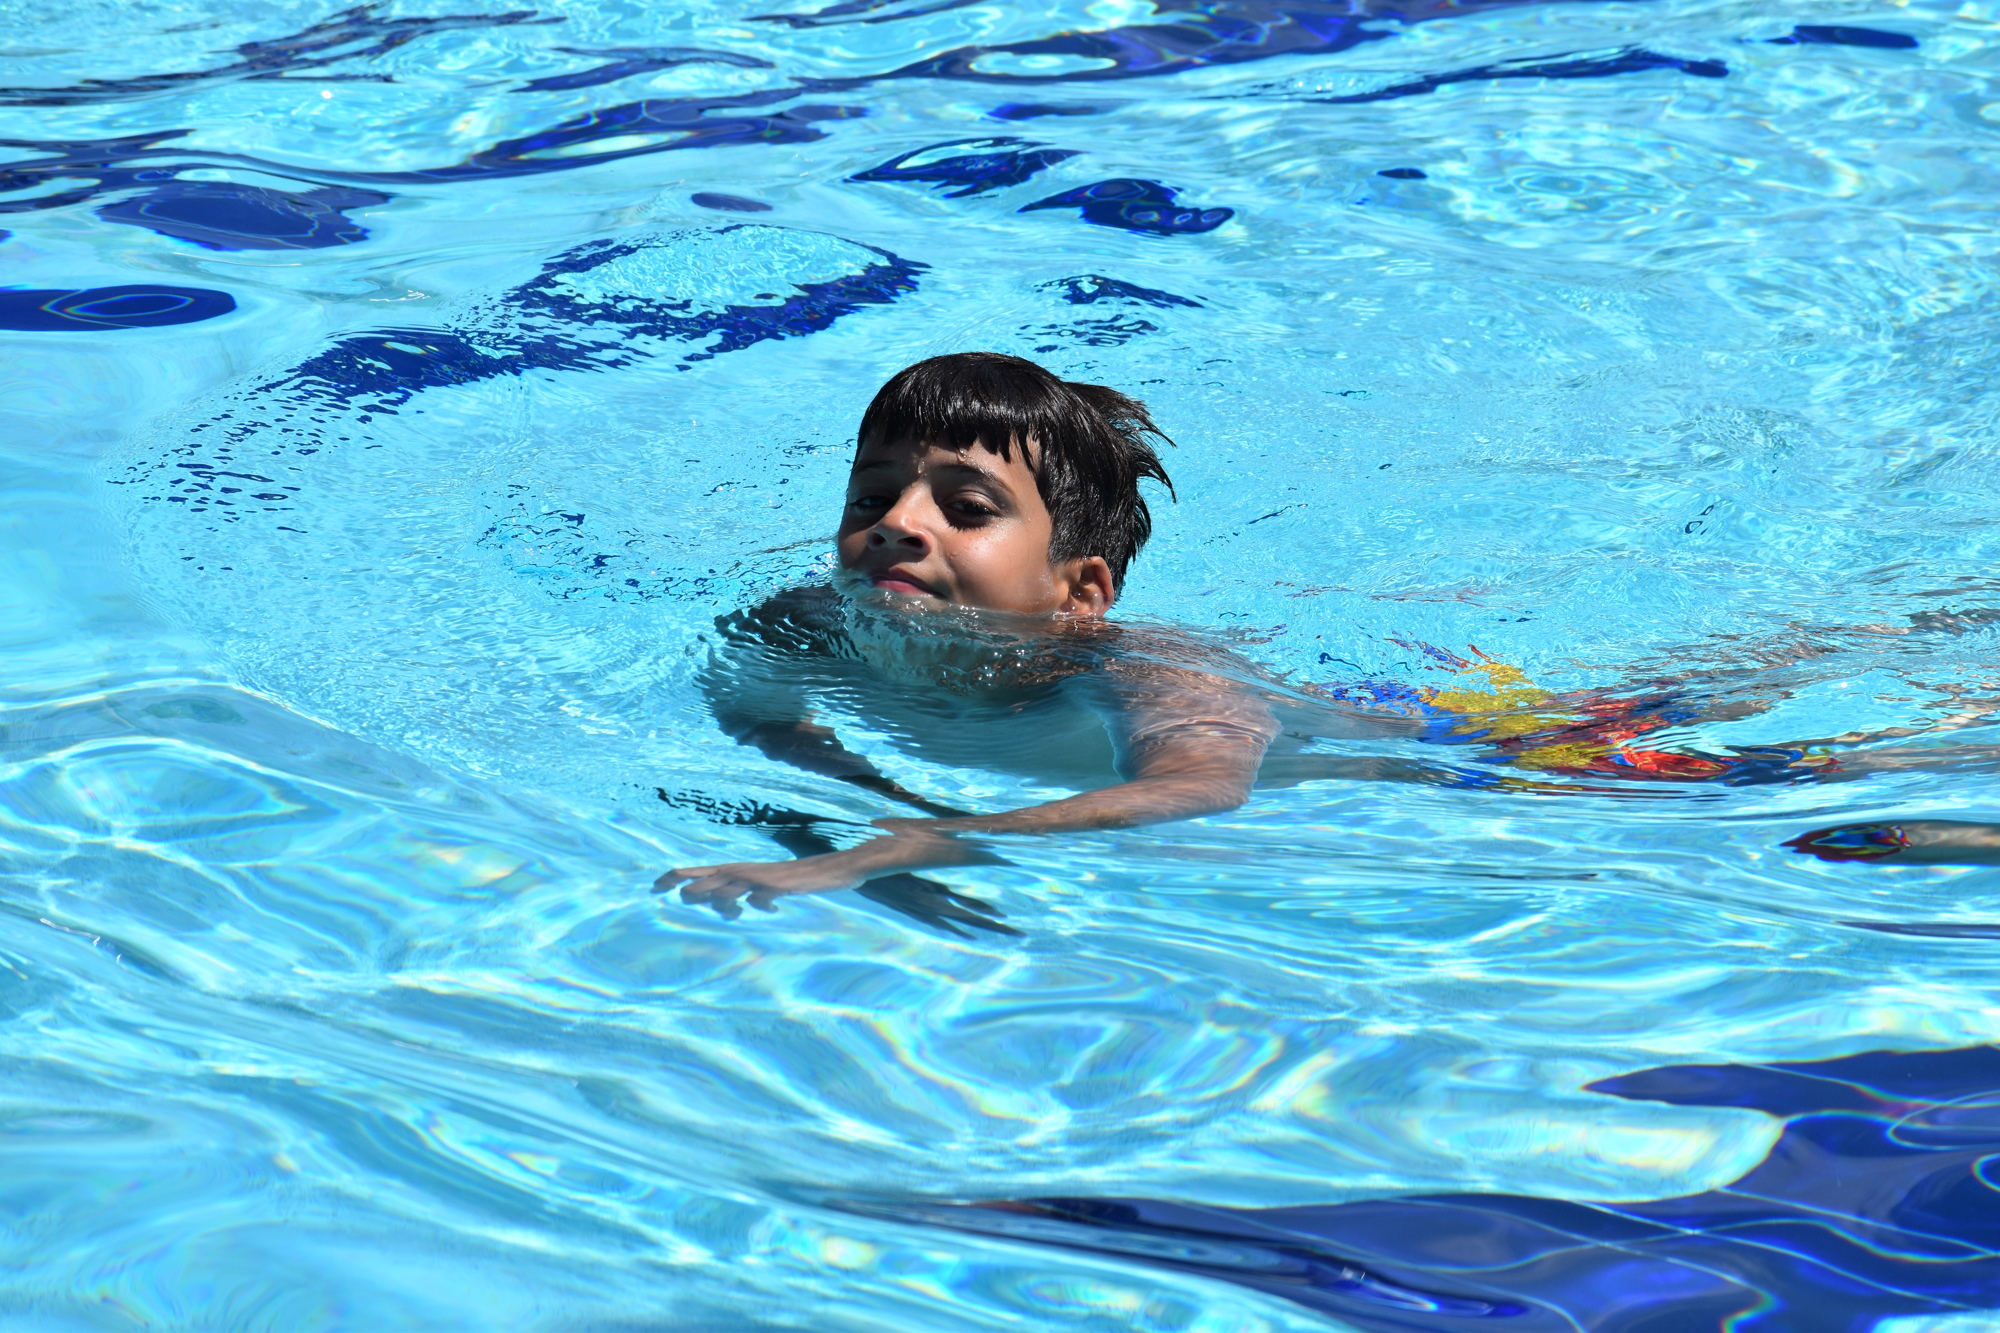 Bradenton's 8-year-old Yosaieo Leoon swims in the pool at GT Bray Park, which has 50-meter lanes. (Photo by Ian Swaby)